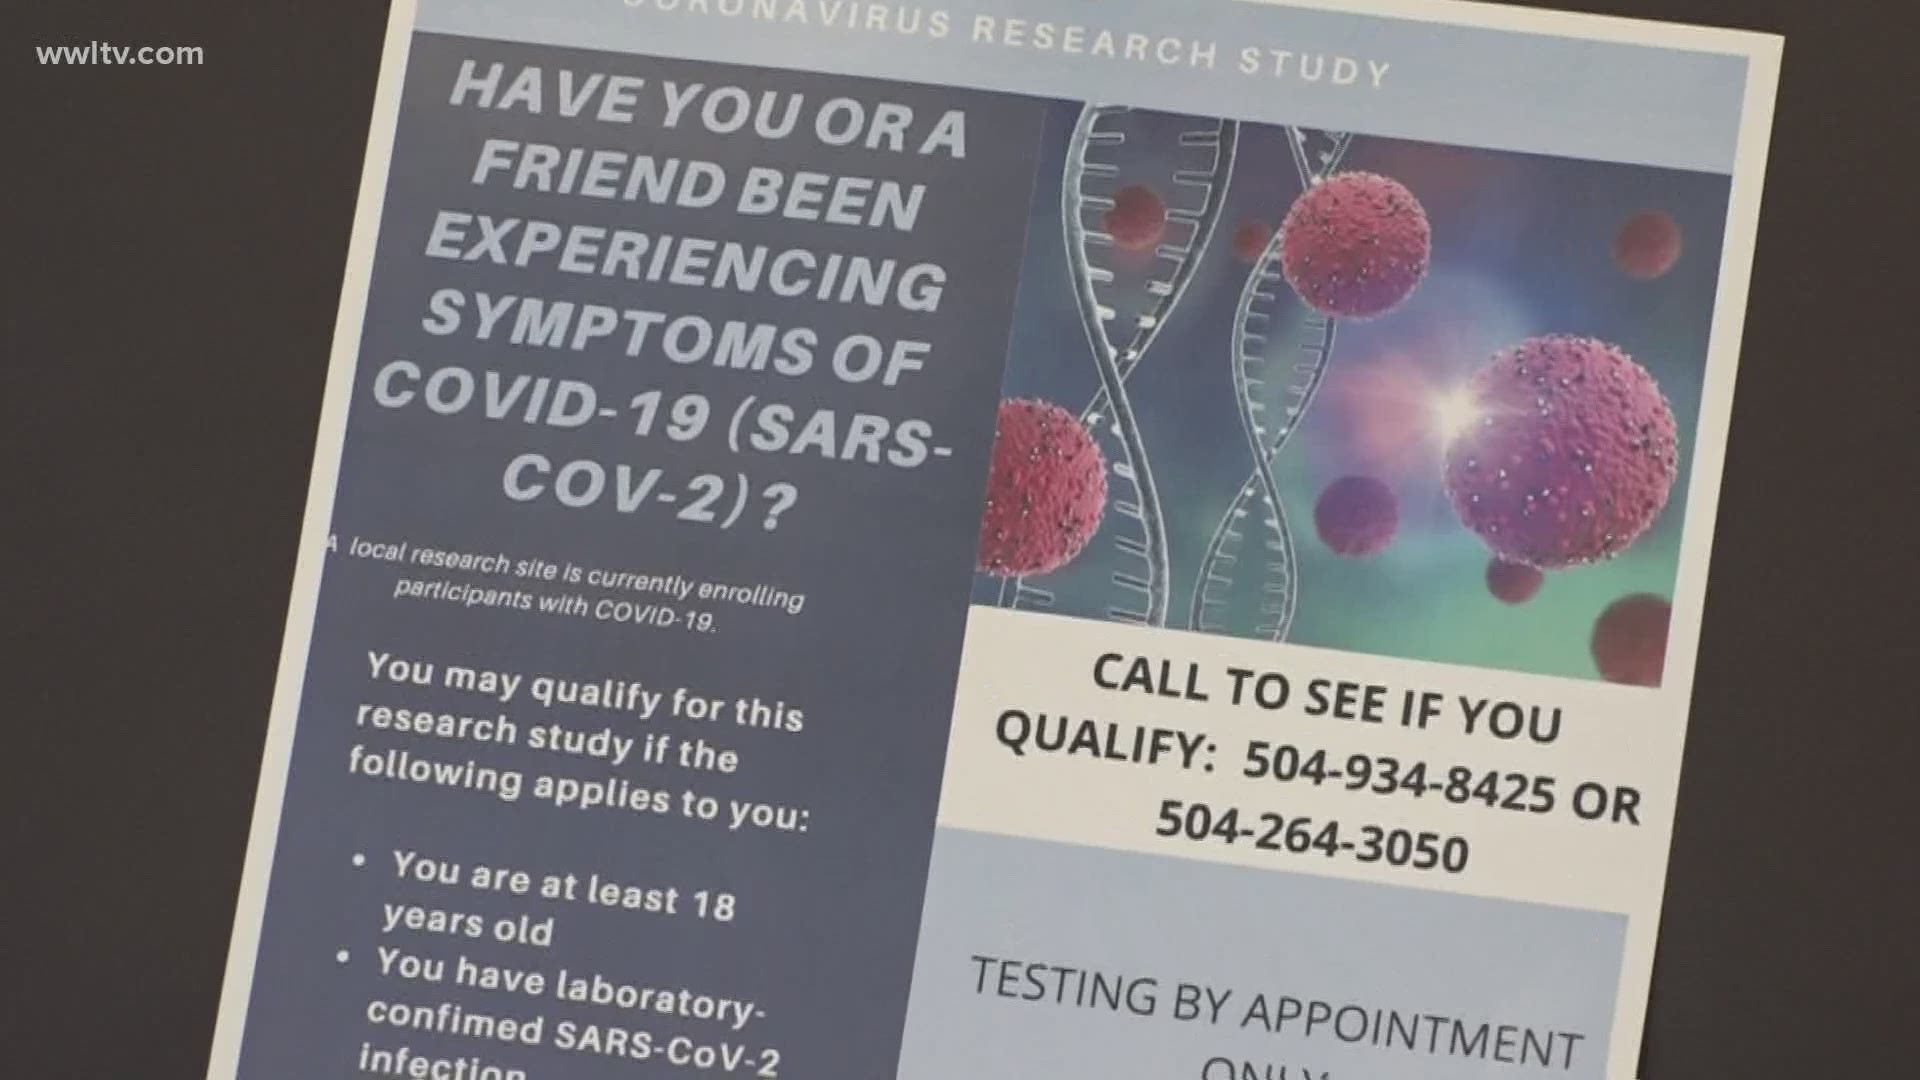 Some locals who have COVID-19 can qualify to join a study on the experimental treatment.